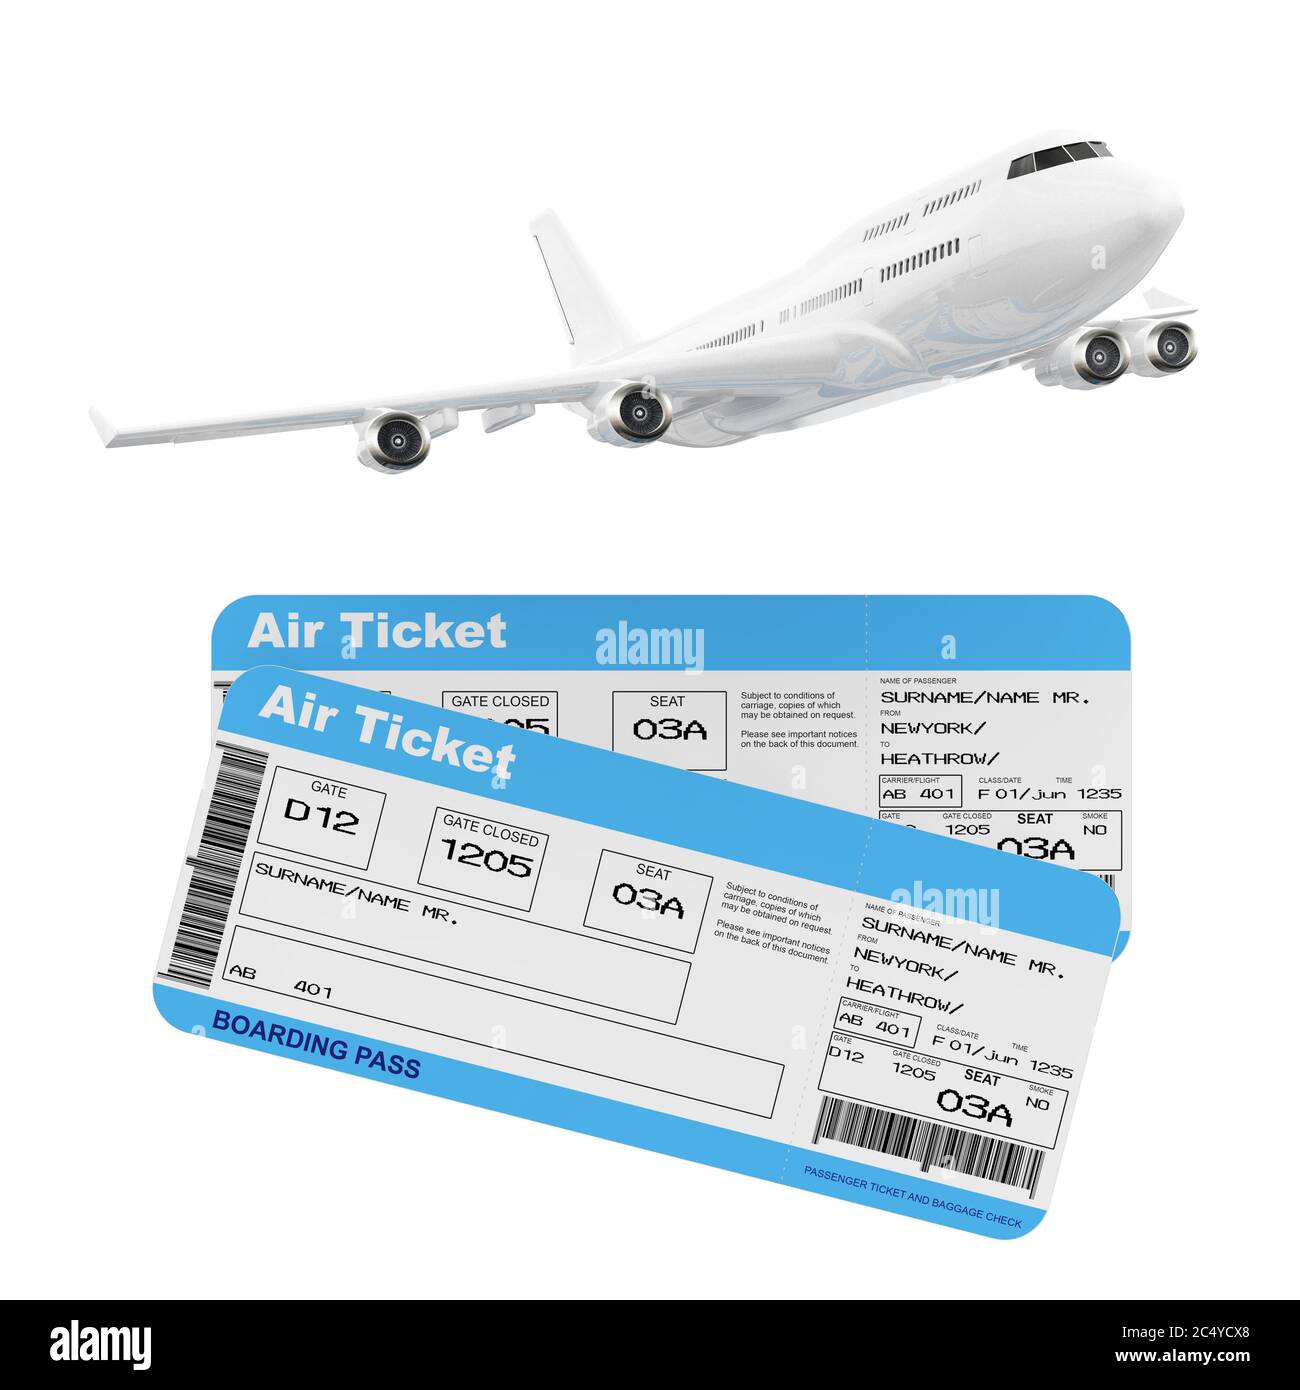 White Jet Passenger's Airplane with Airline Boarding Pass Tickets on a white background. 3d Rendering Stock Photo